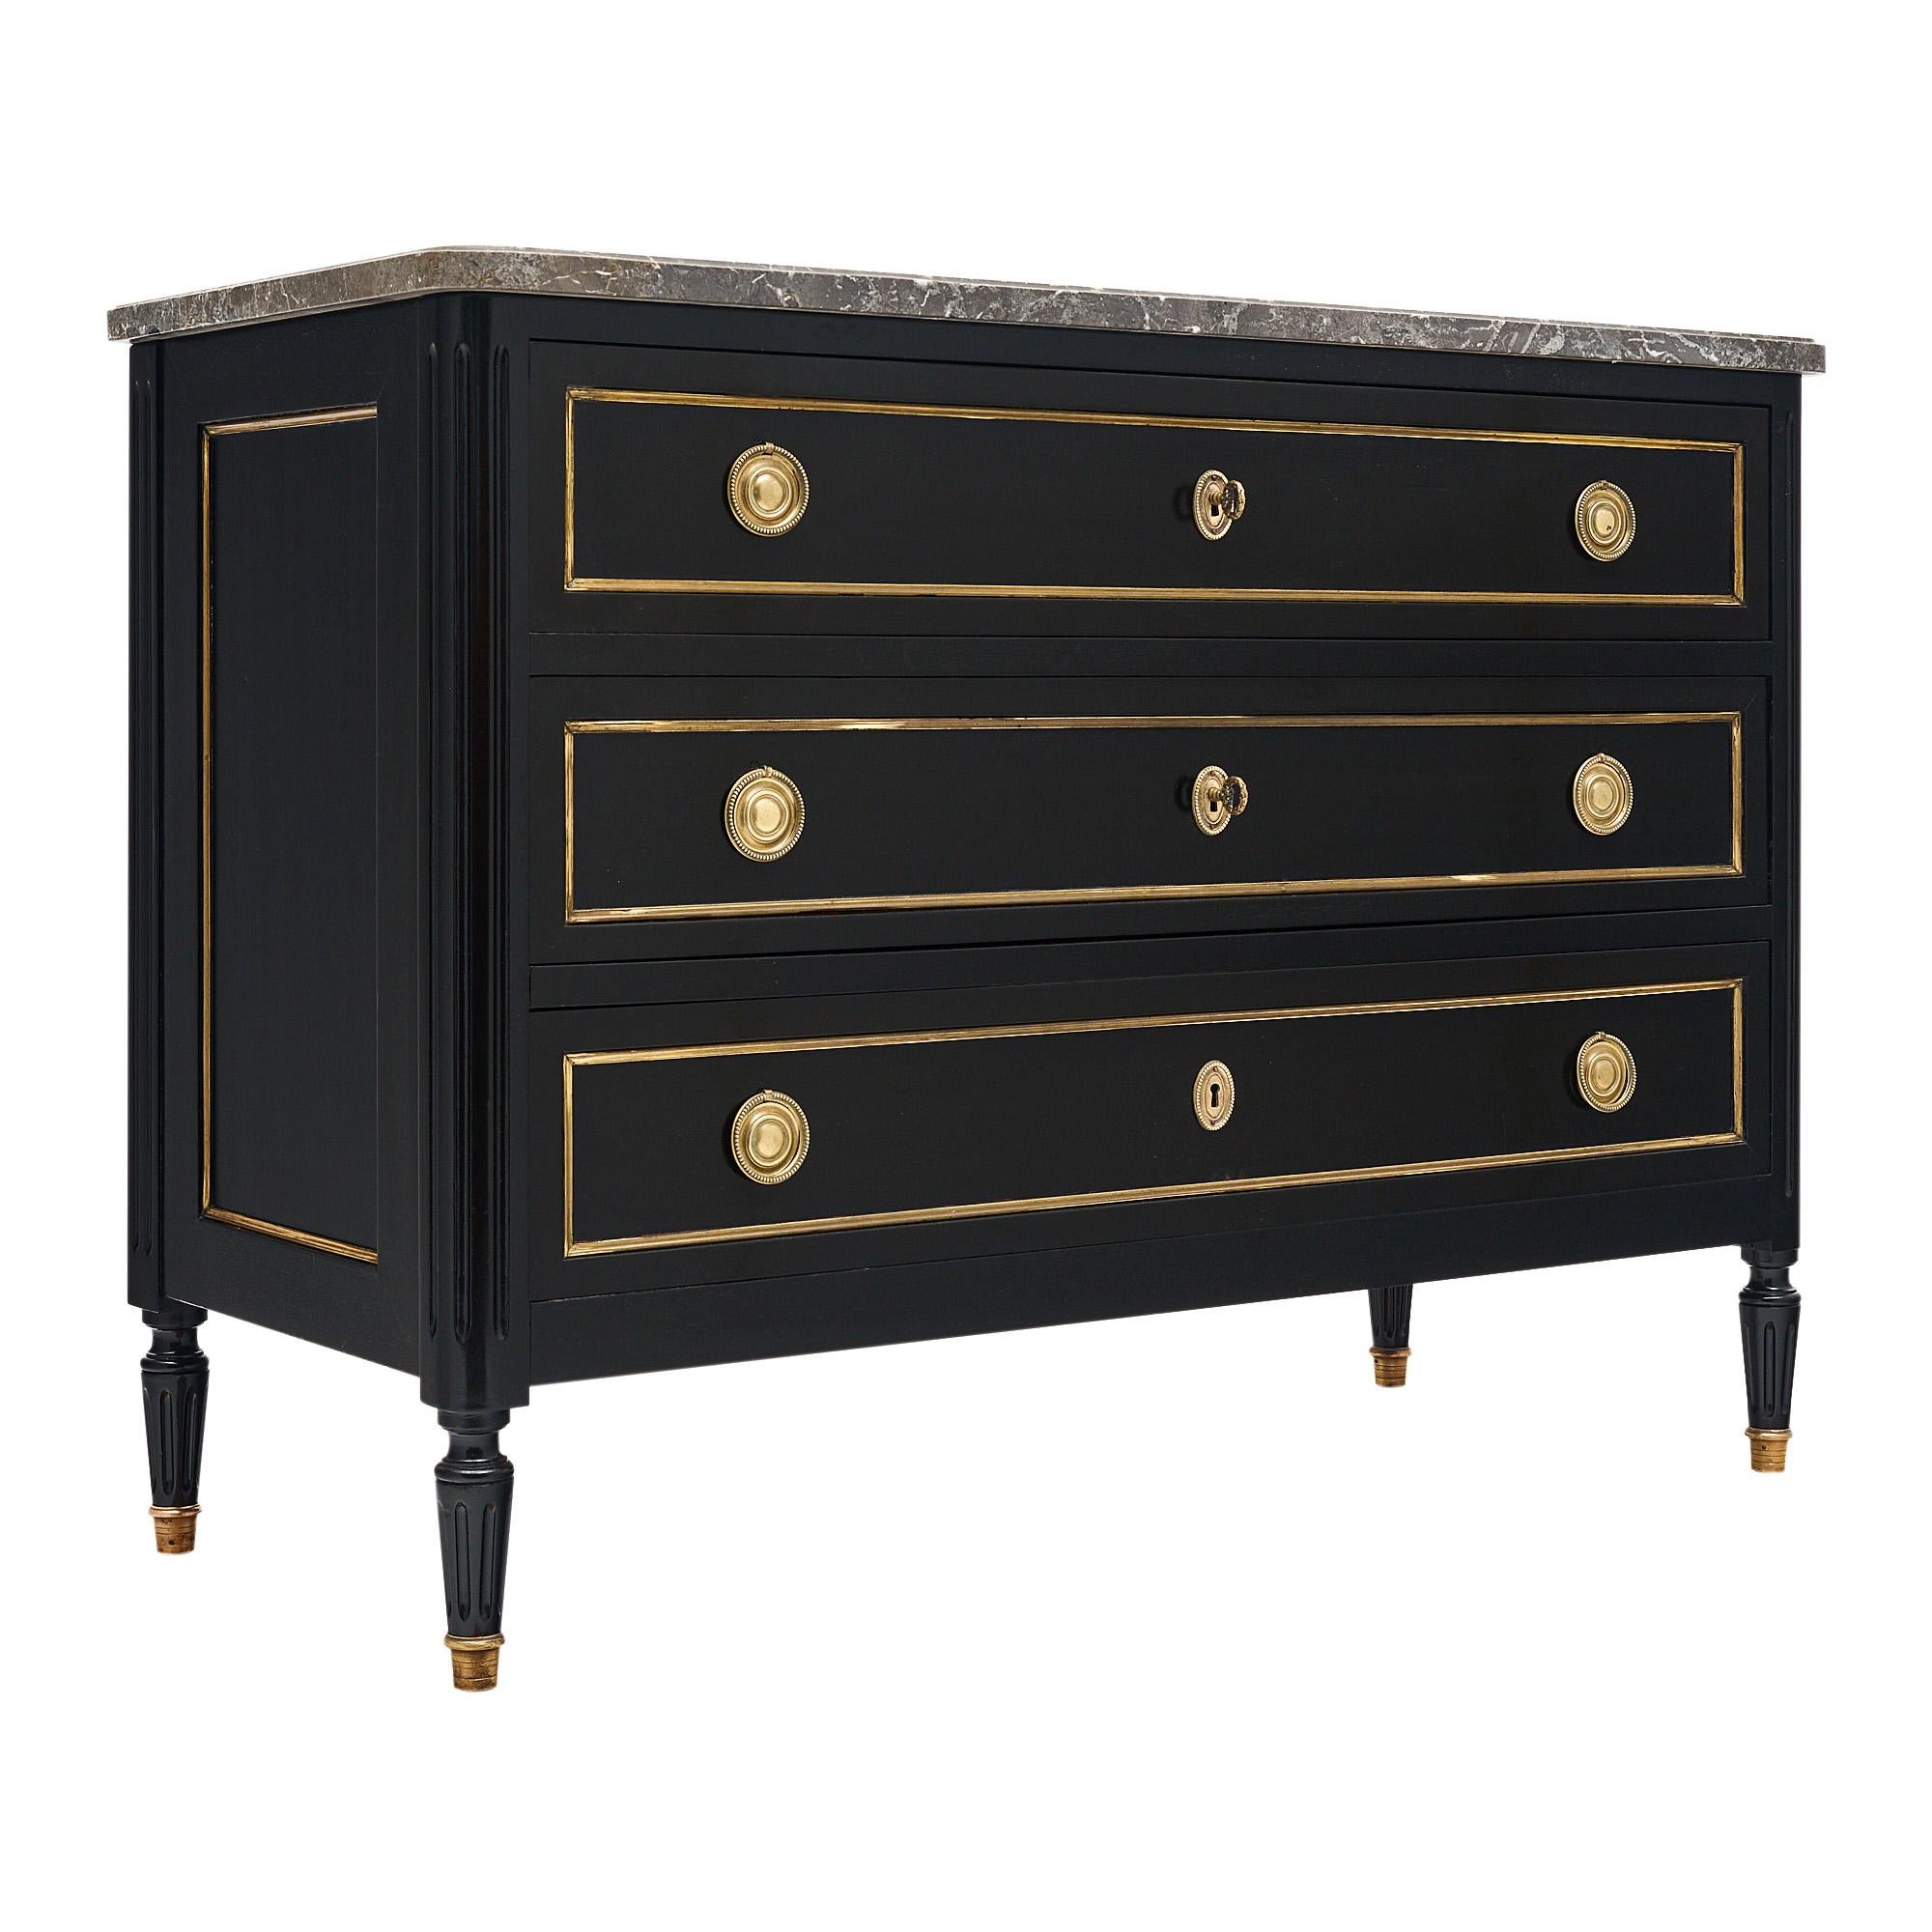 Chest of Drawers, French, in the Louis XVI style. This piece has three dovetailed drawers with brass trim and hardware throughout. The pulls and locks are in working condition. The piece is supported by four tapered feet capped in brass. The chest